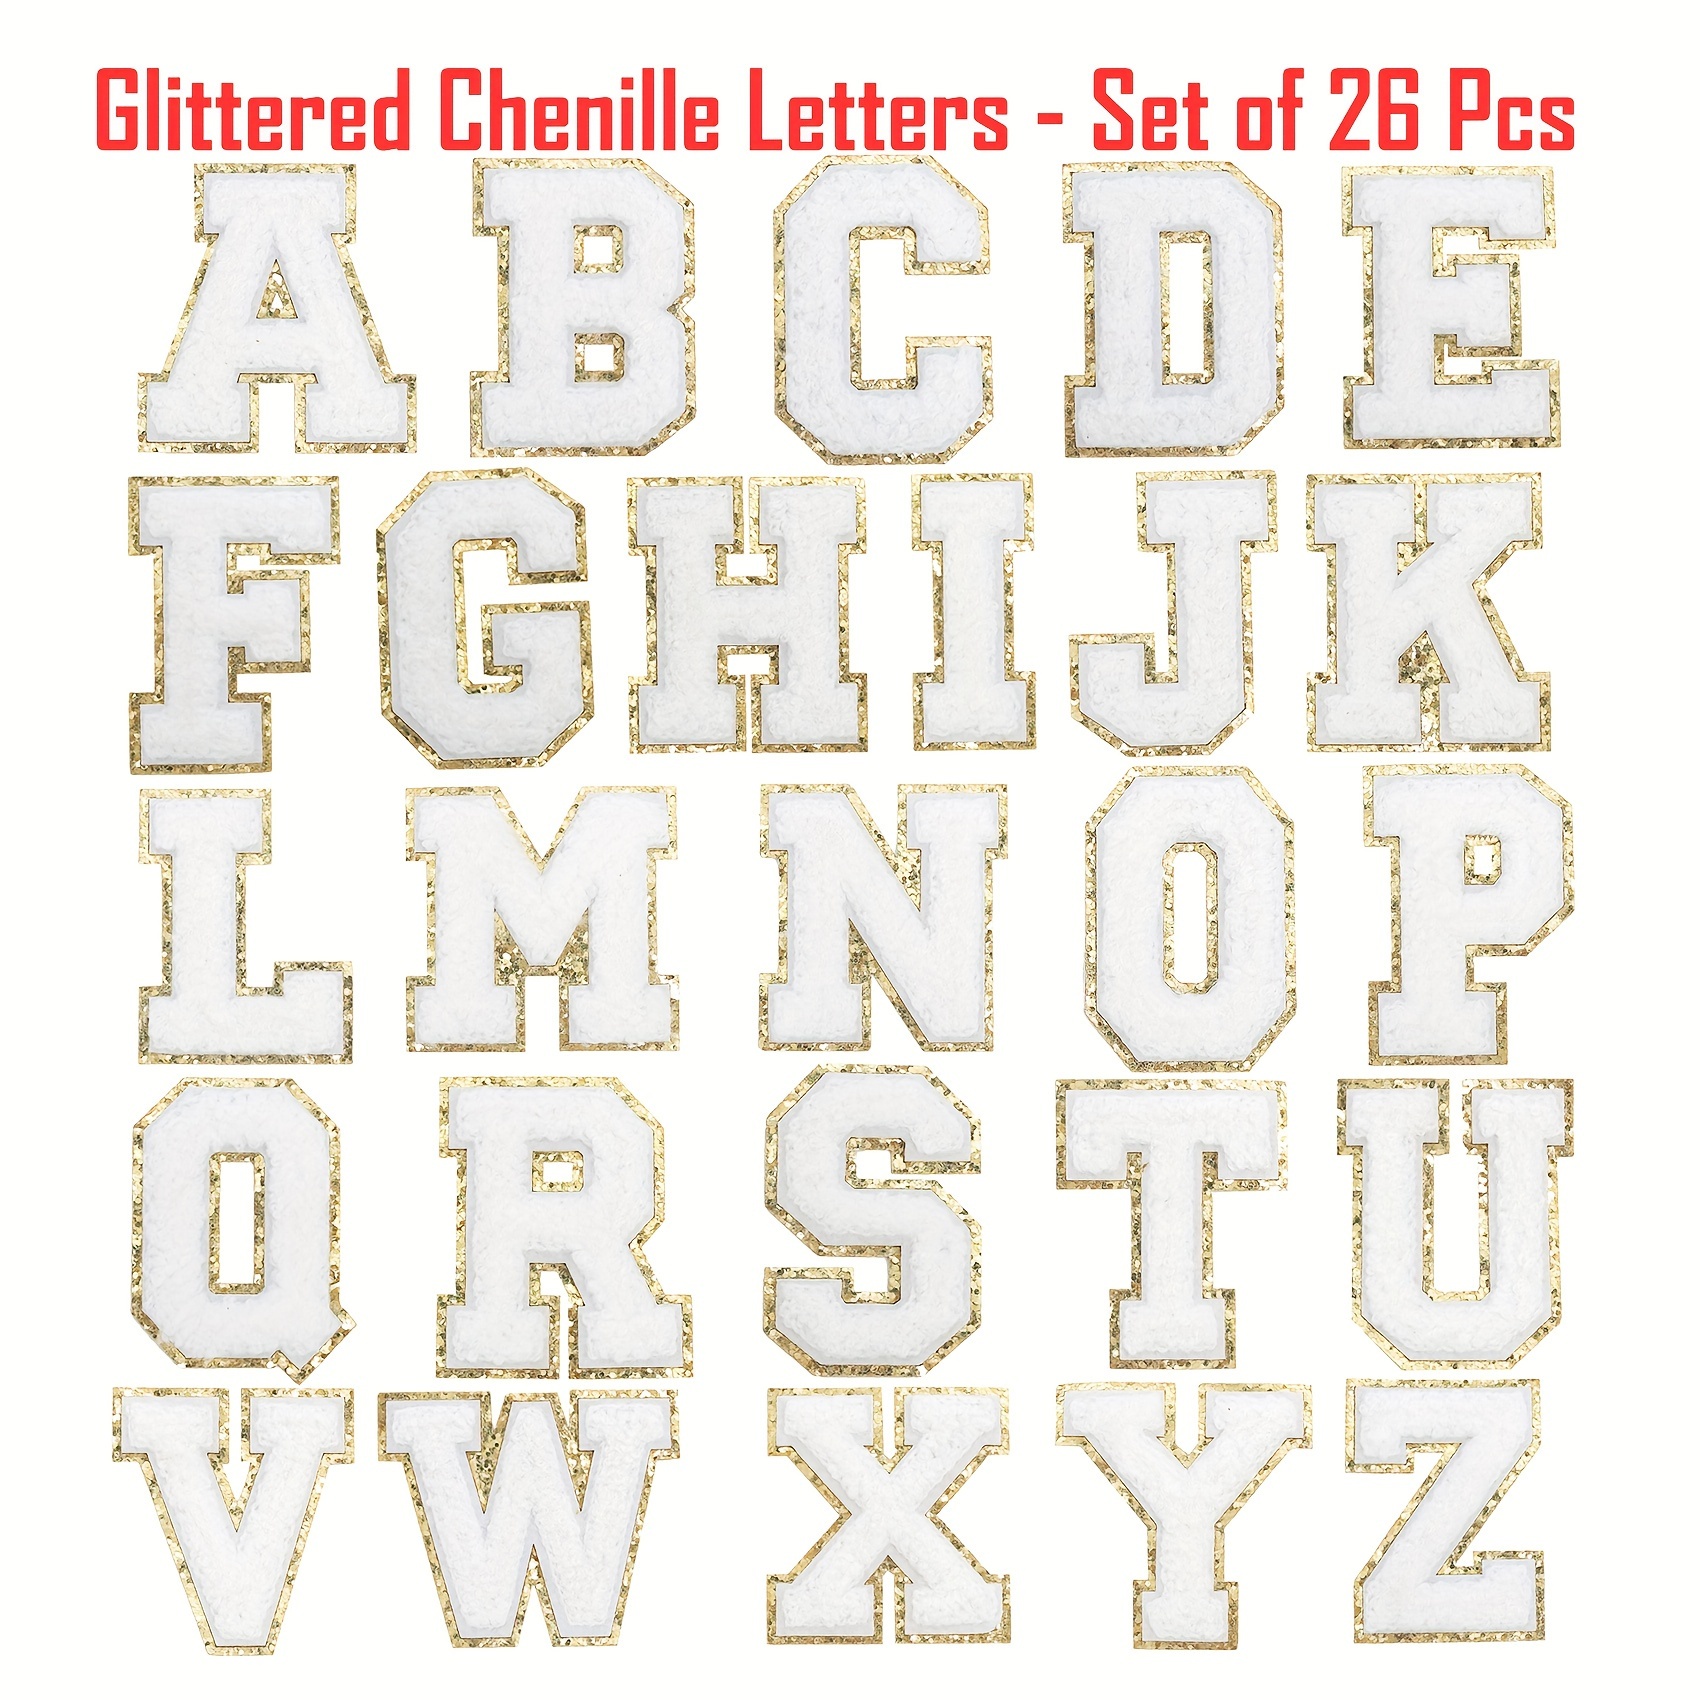 Lavender Iron On Varsity Letter Patches - Sets of 3 Letters - Large 8 cm  Chenille with Gold GlitterL